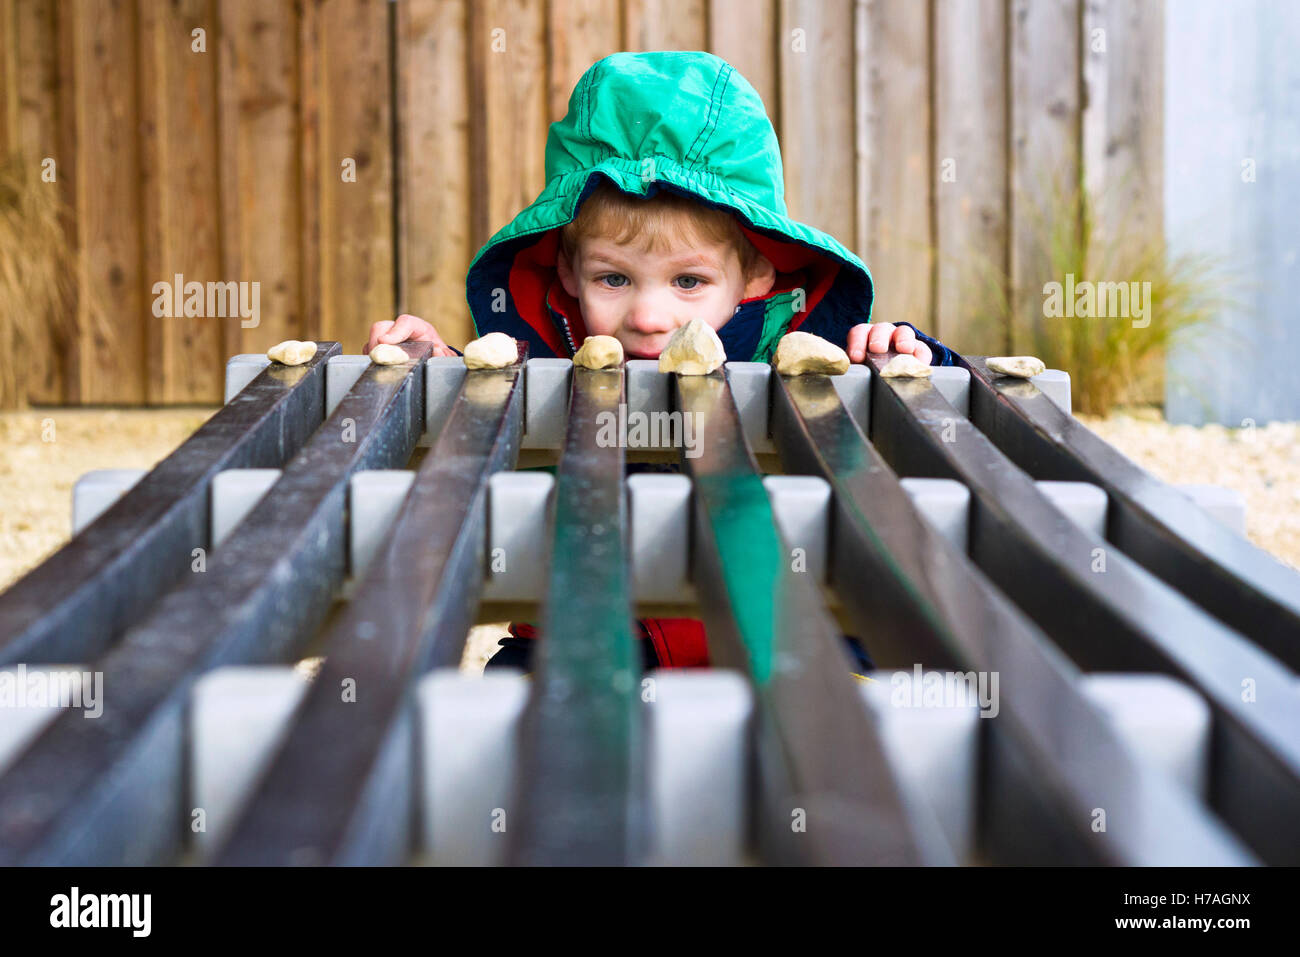 Young boy arranging stones on a bench Stock Photo